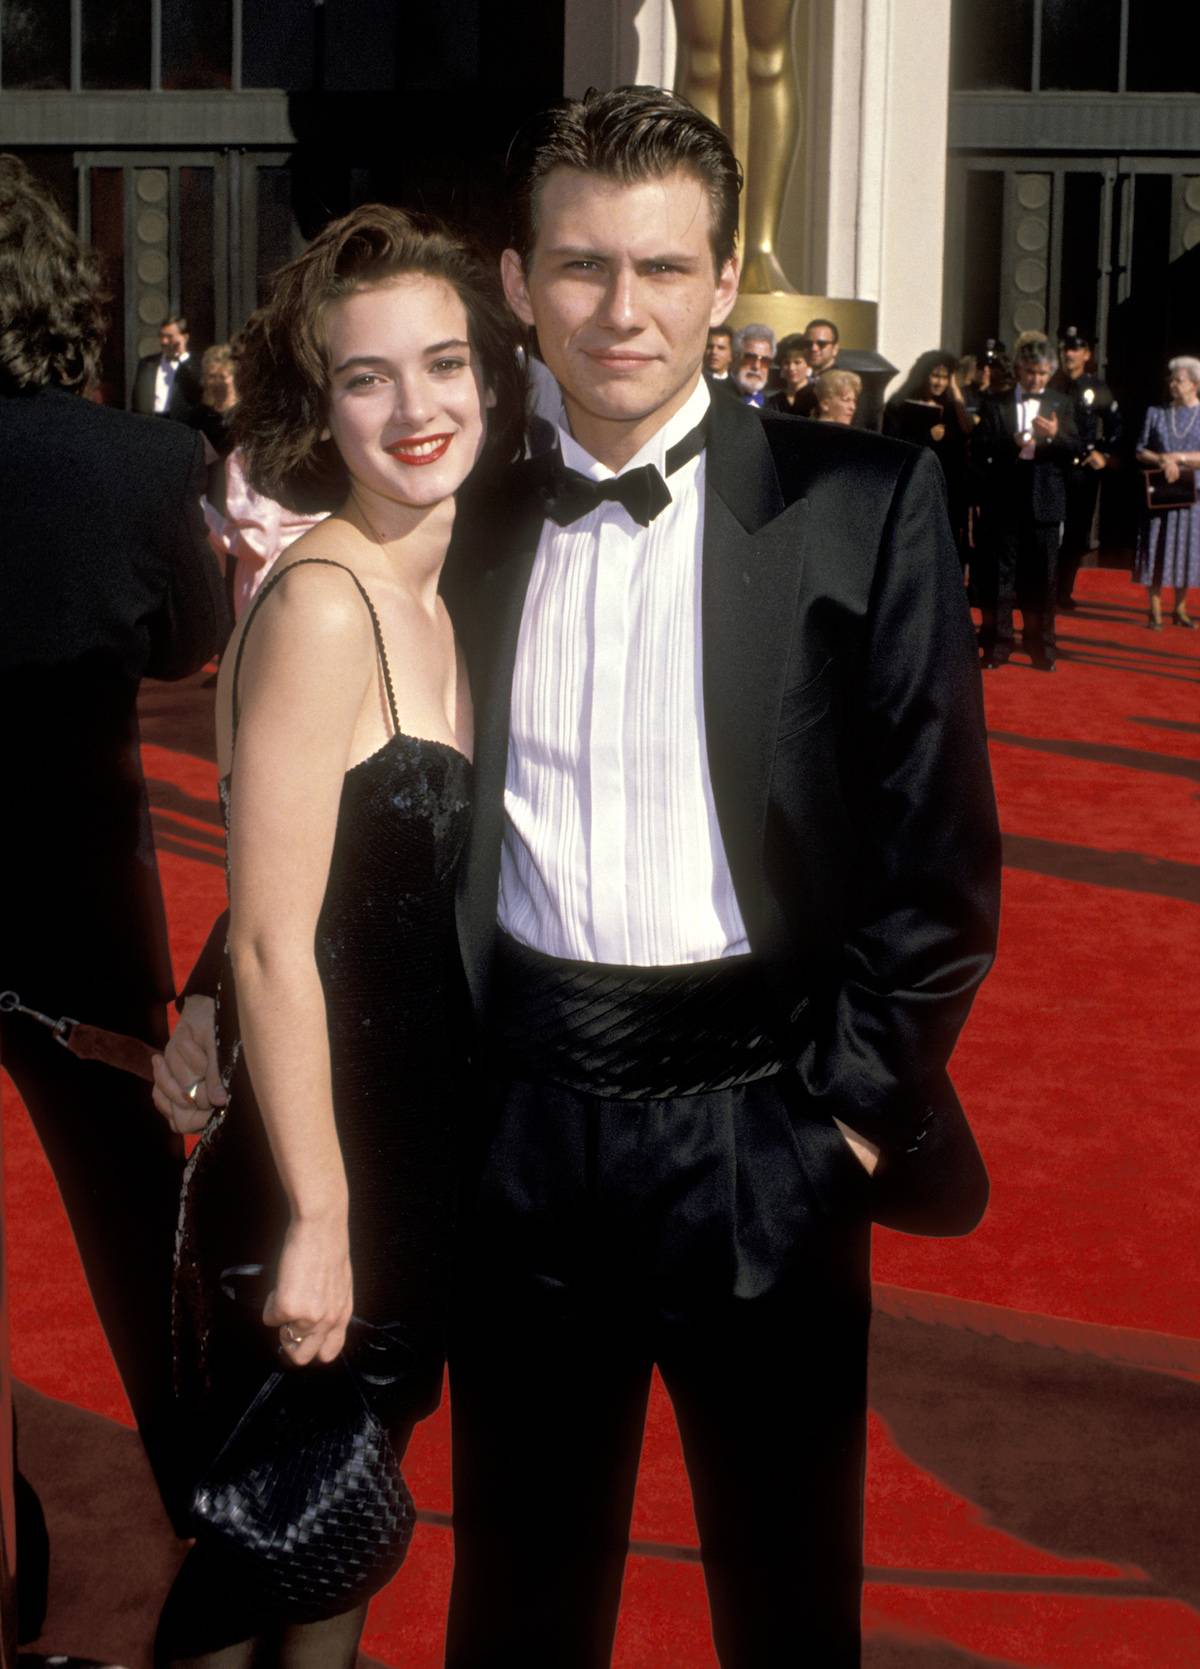 Winona Ryder i Christian Slater, 1989 rok, Fot. Ron Galella/Ron Galella Collection via Getty Images